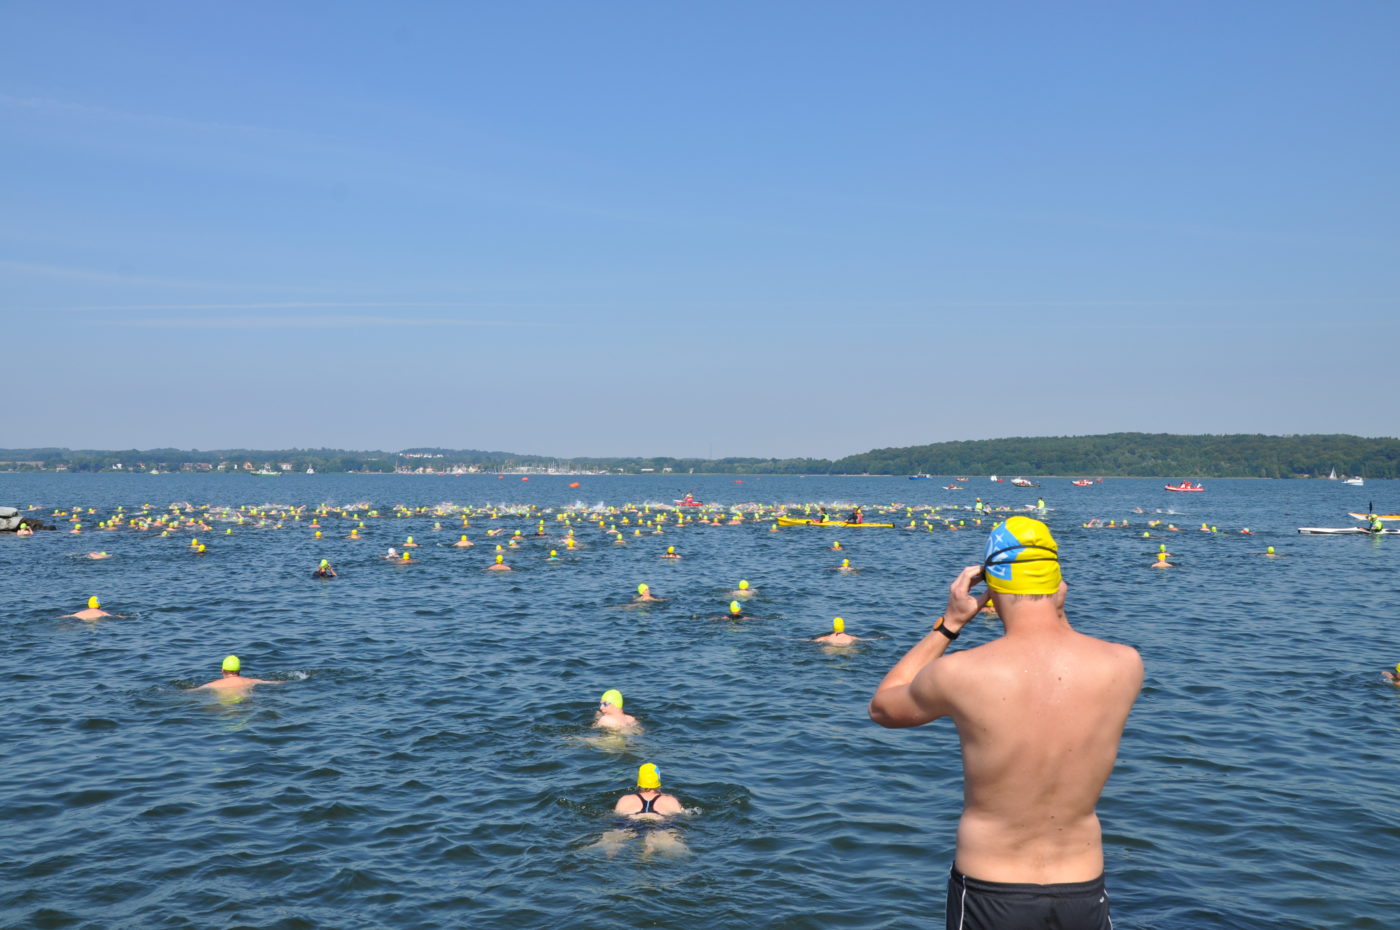 many people participating at the Vilm Swimming Event on the island Rügen